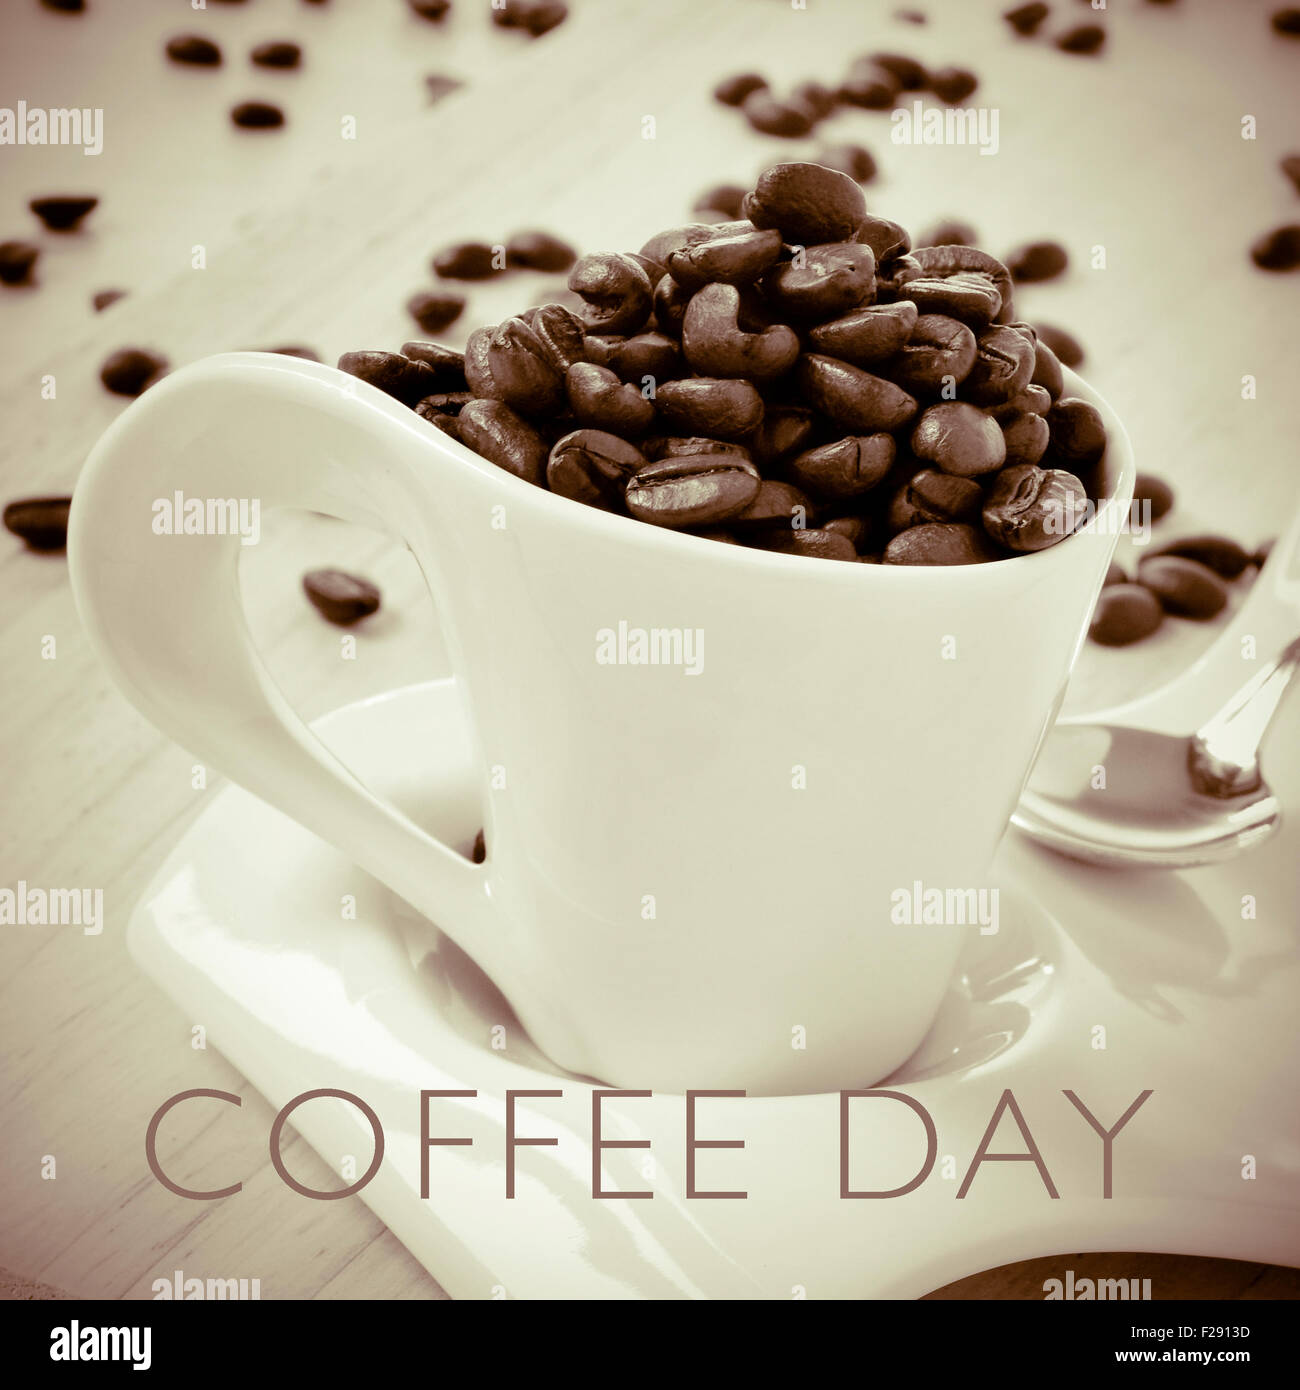 a cup full of roasted coffee beans and the text coffee day, in duotone Stock Photo